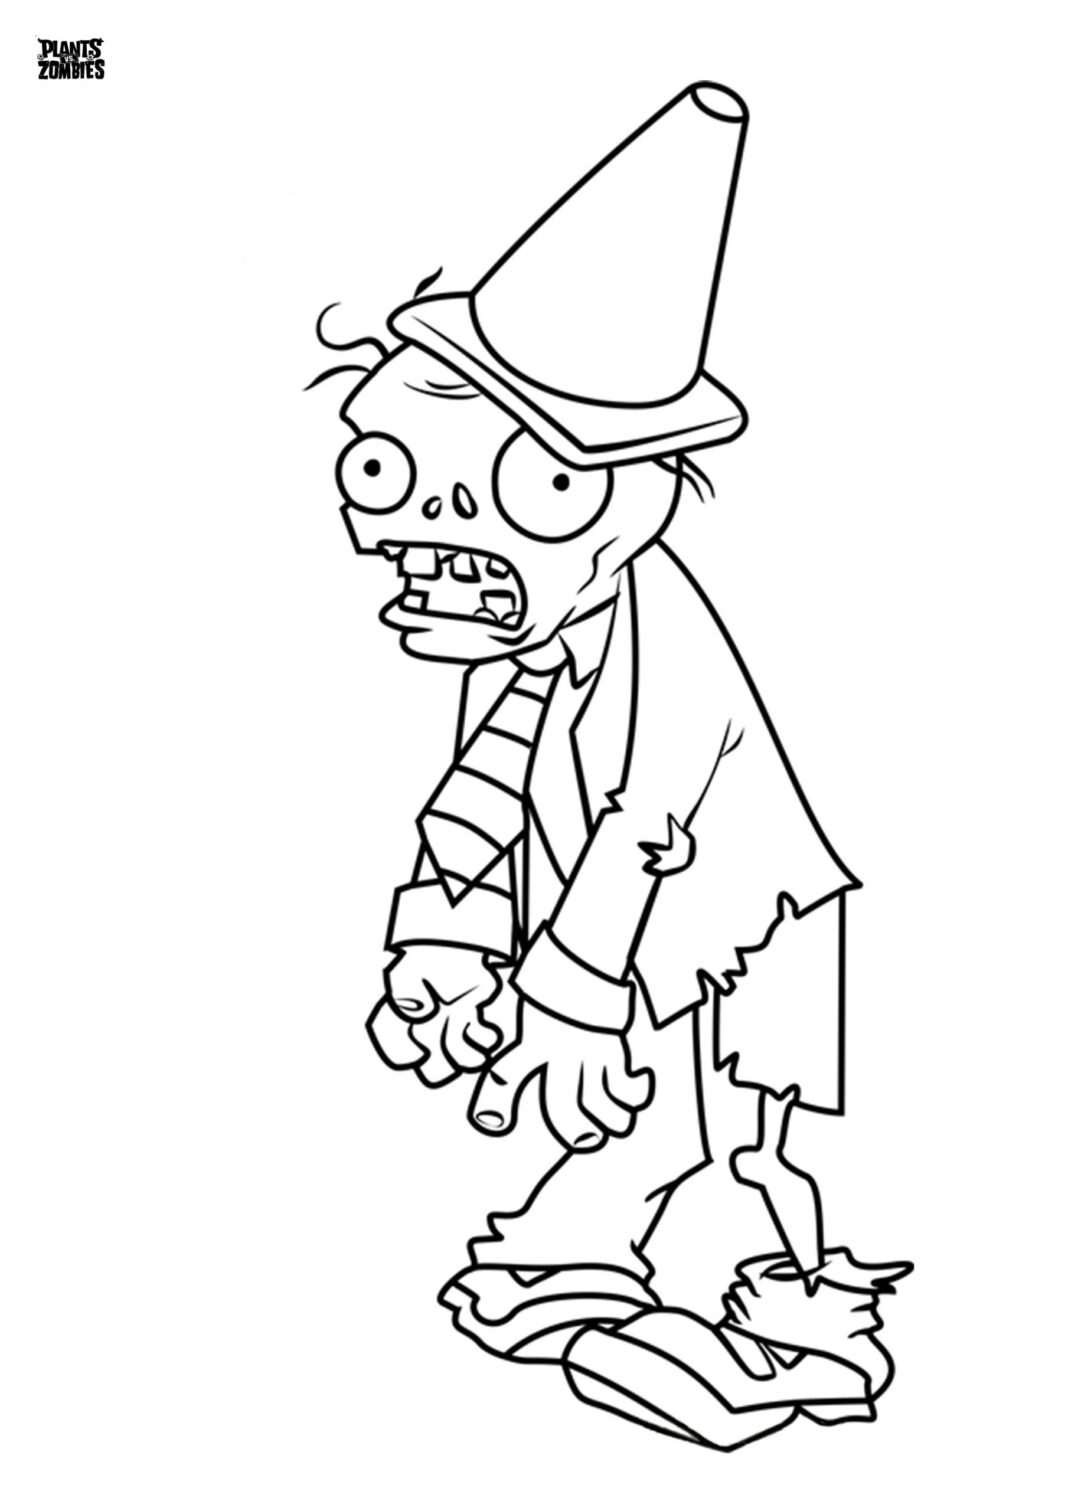 Zombiak online coloring book for kids